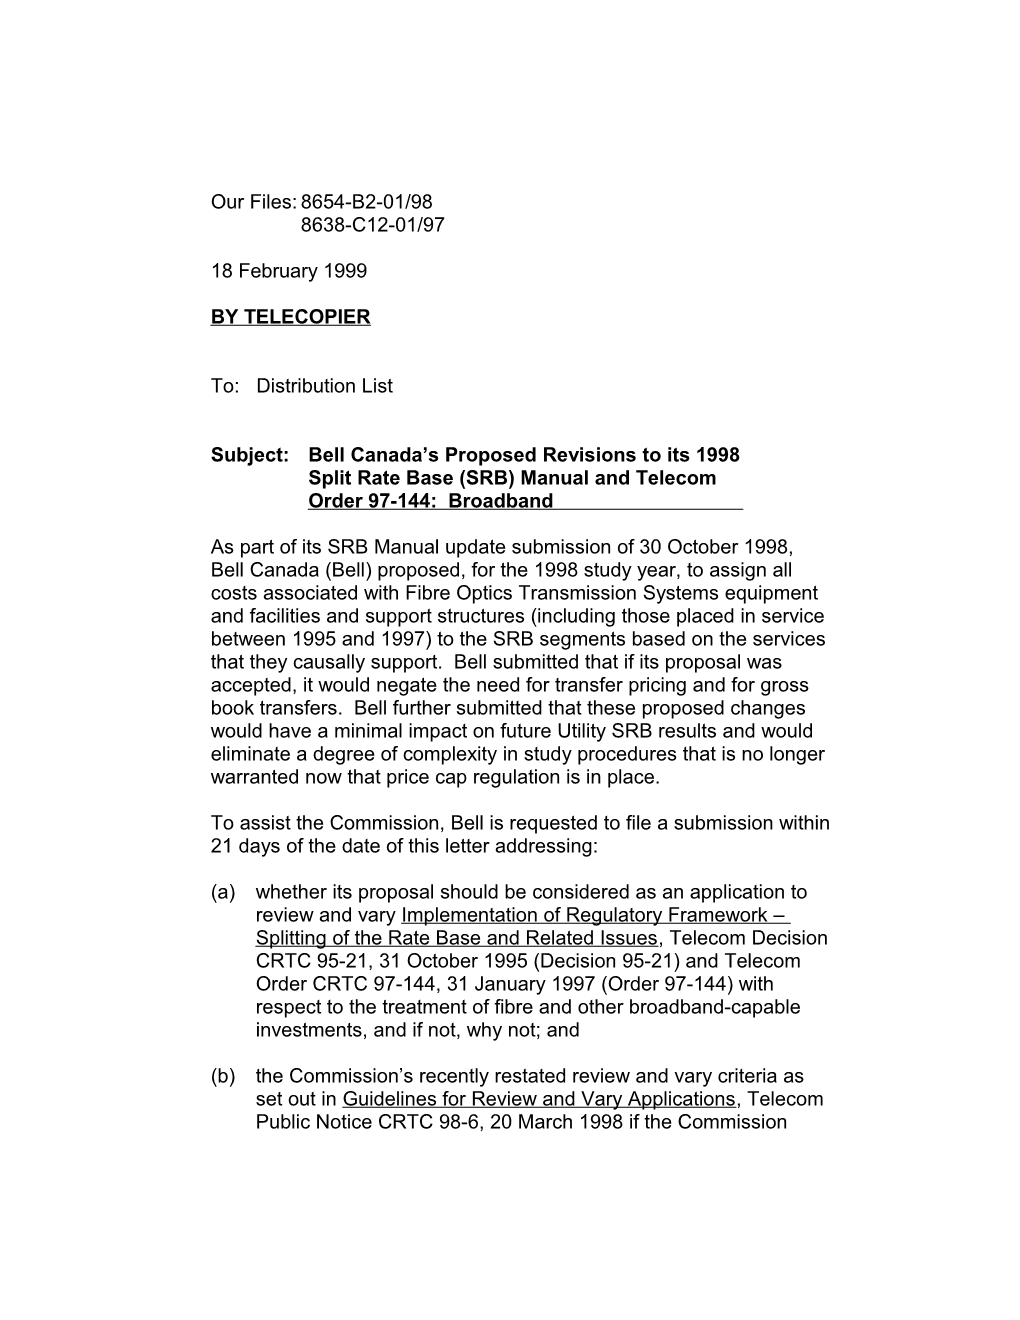 Subject: Bell Canada S Proposed Revisions to Its 1998